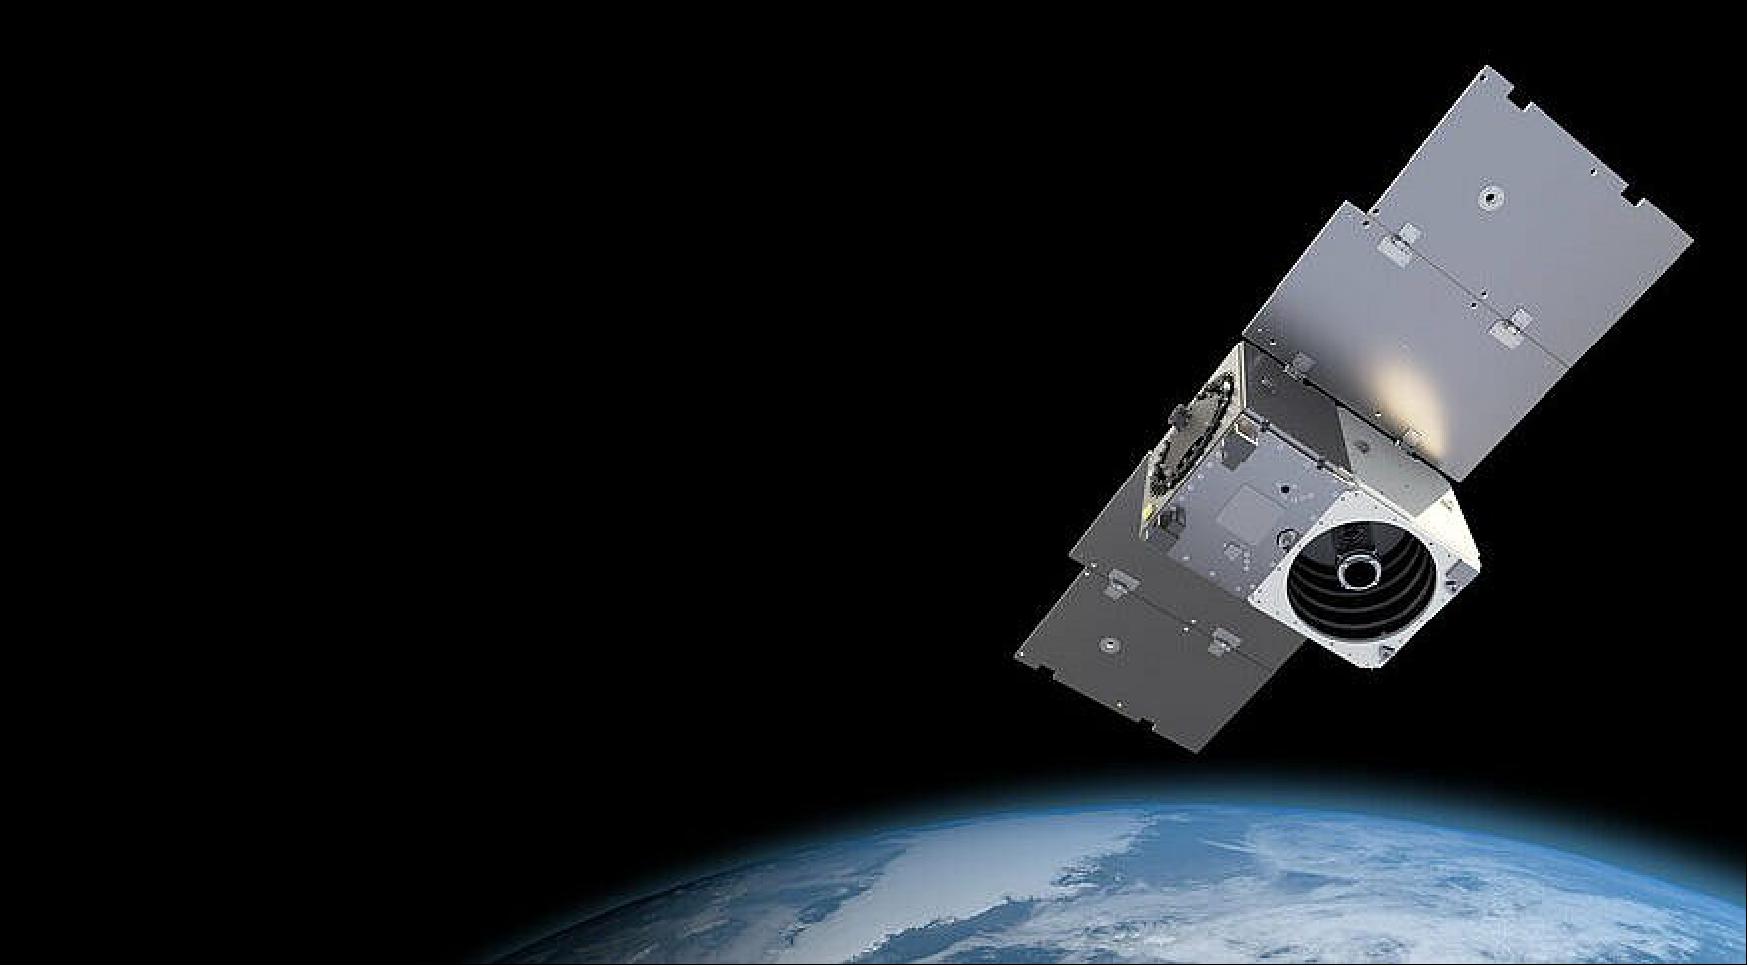 Figure 10: Planet unveiled “very high resolution” Pelican Earth-imaging satellites, which the company plans to design, build and manufacture in-house (image credit: Planet Labs Inc.)